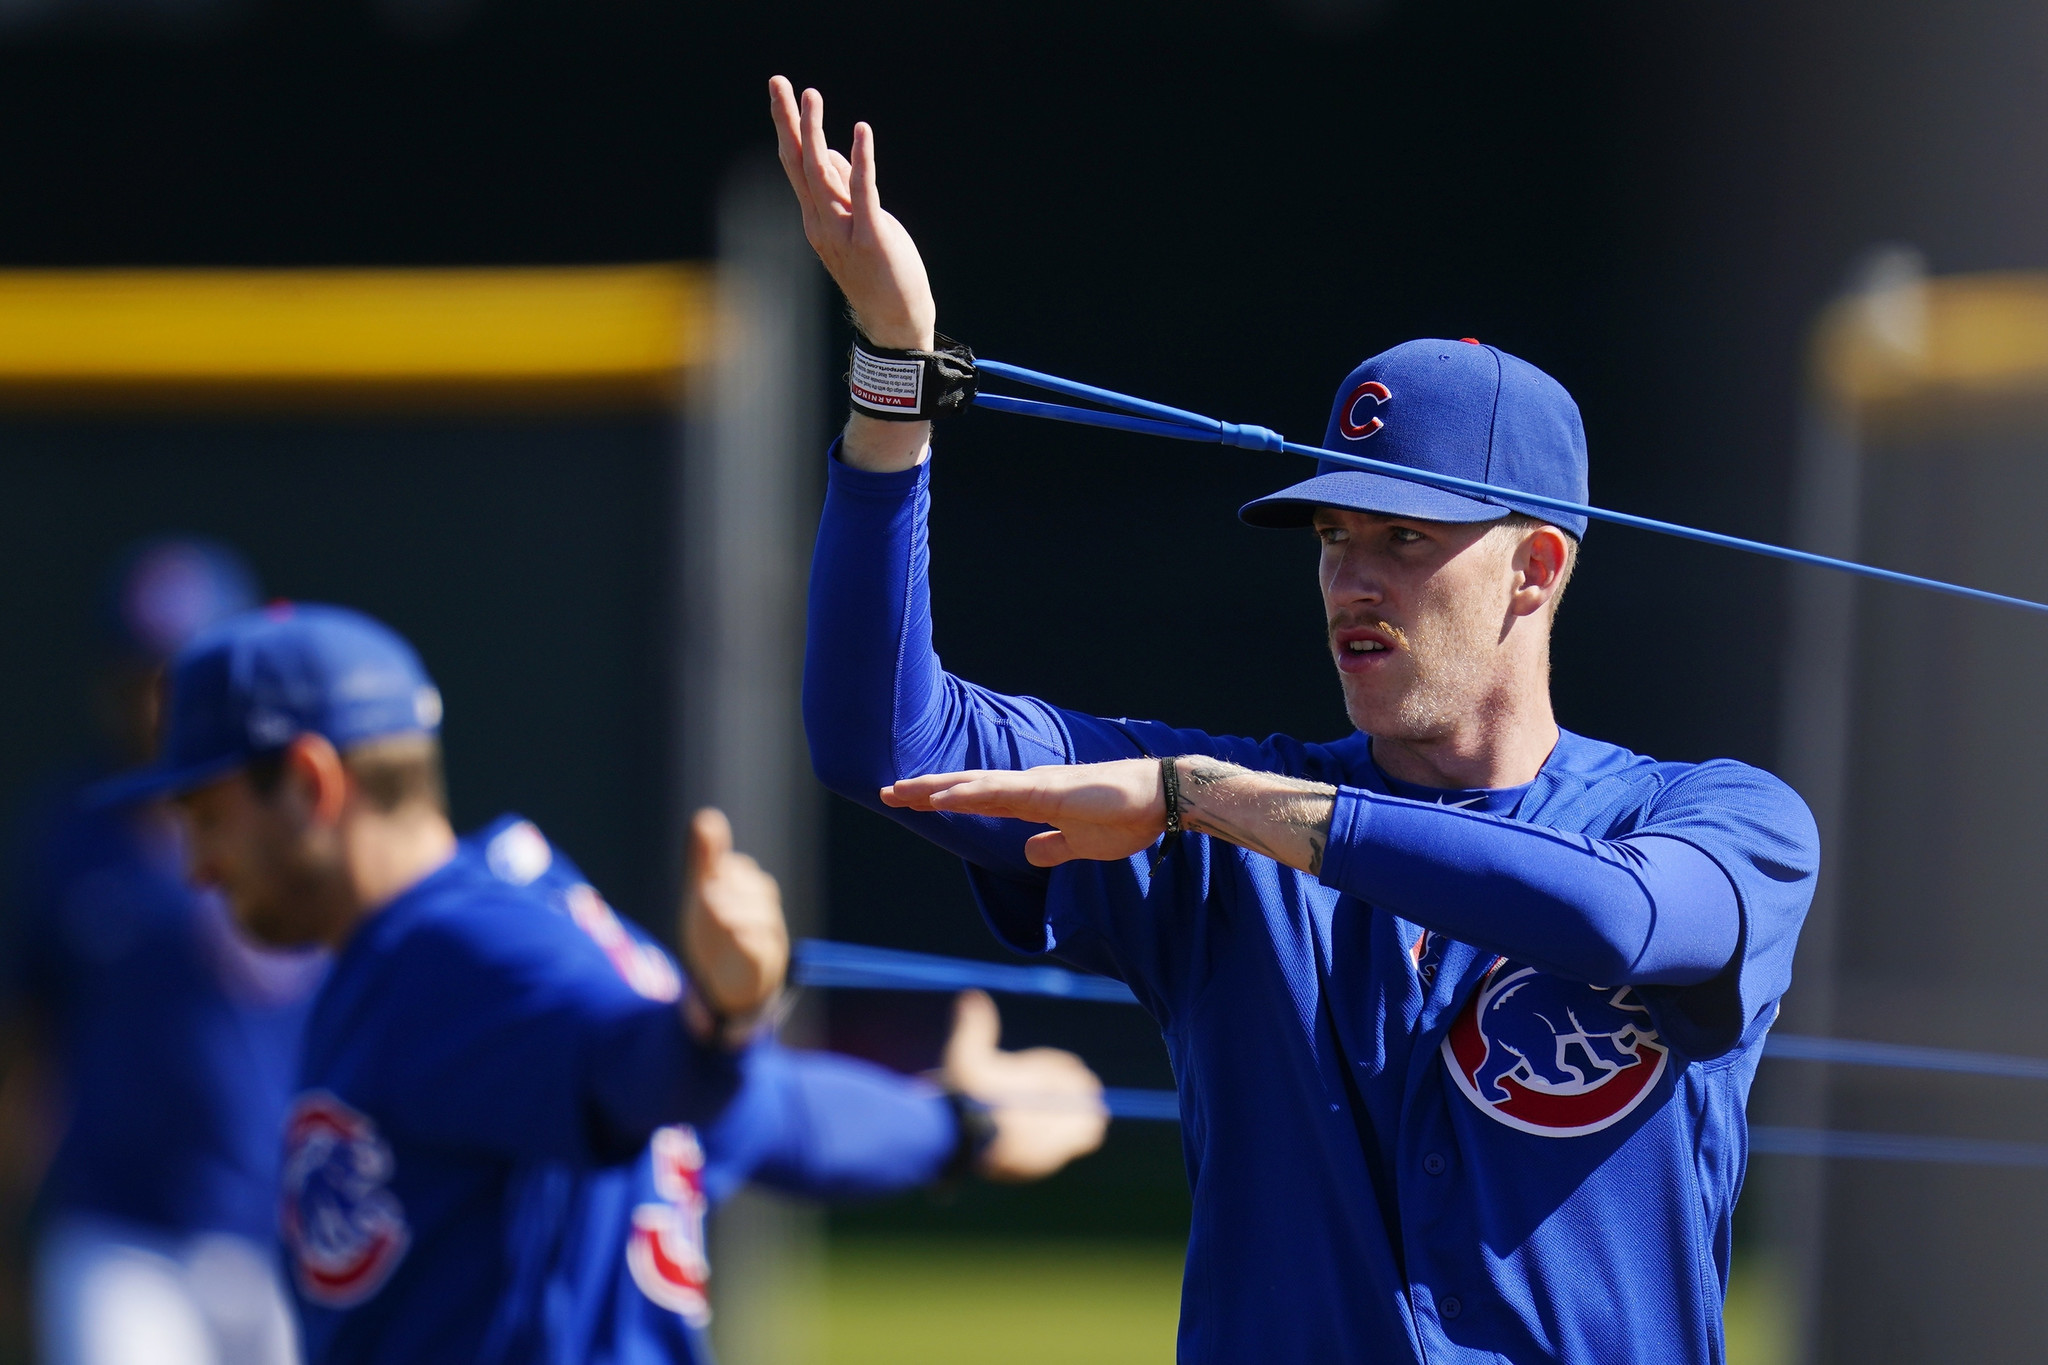 Chicago Cubs Top Prospect Pete Crow-Armstrong Has Crazy Ties